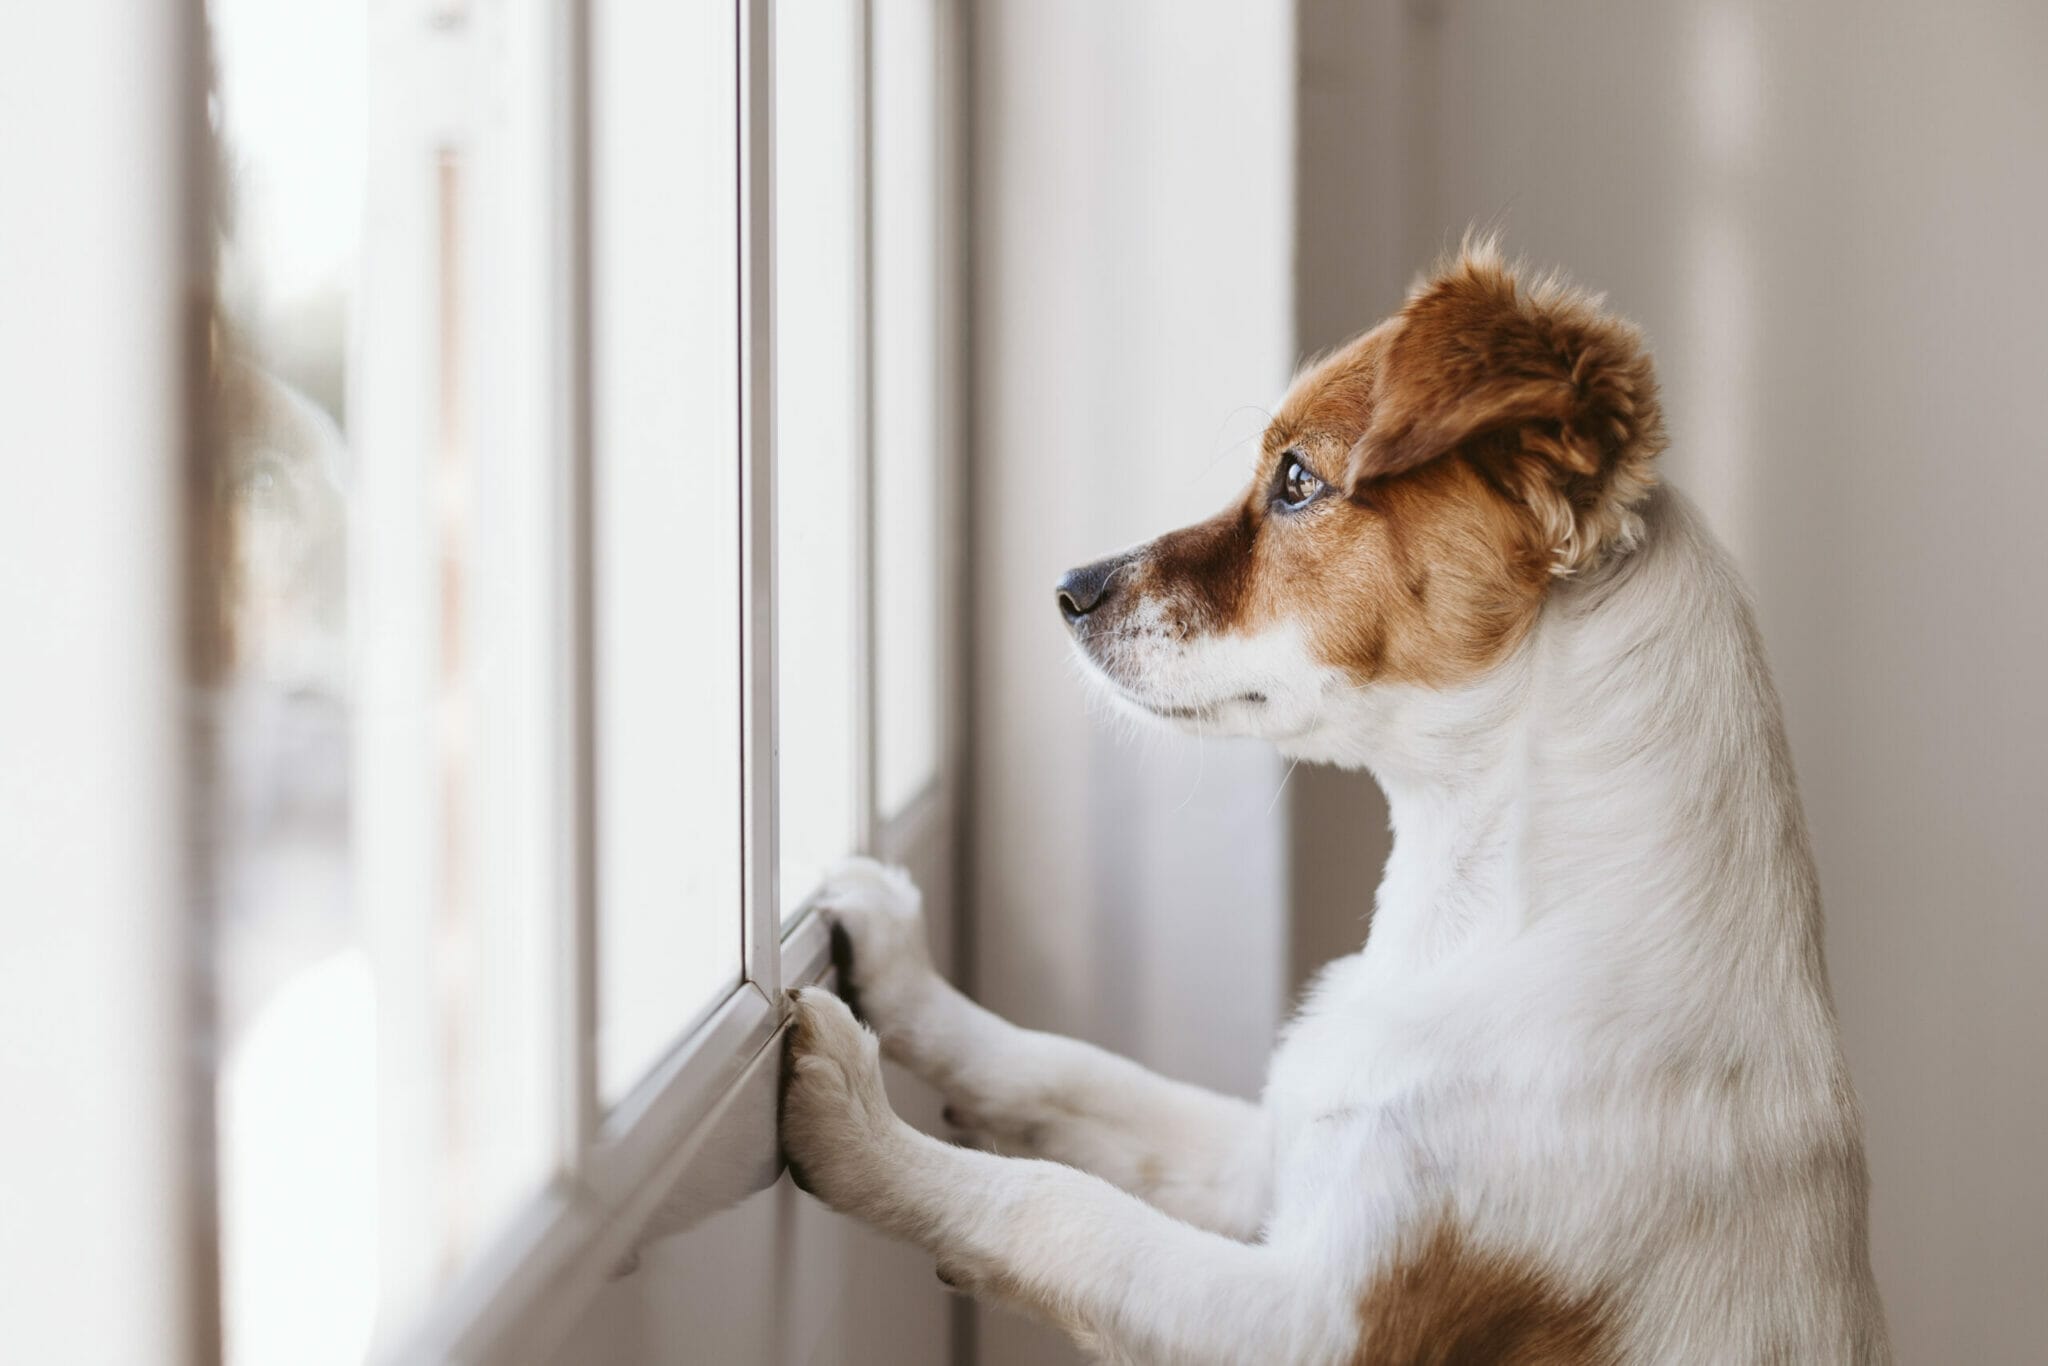 Keep your dogs away from the windows